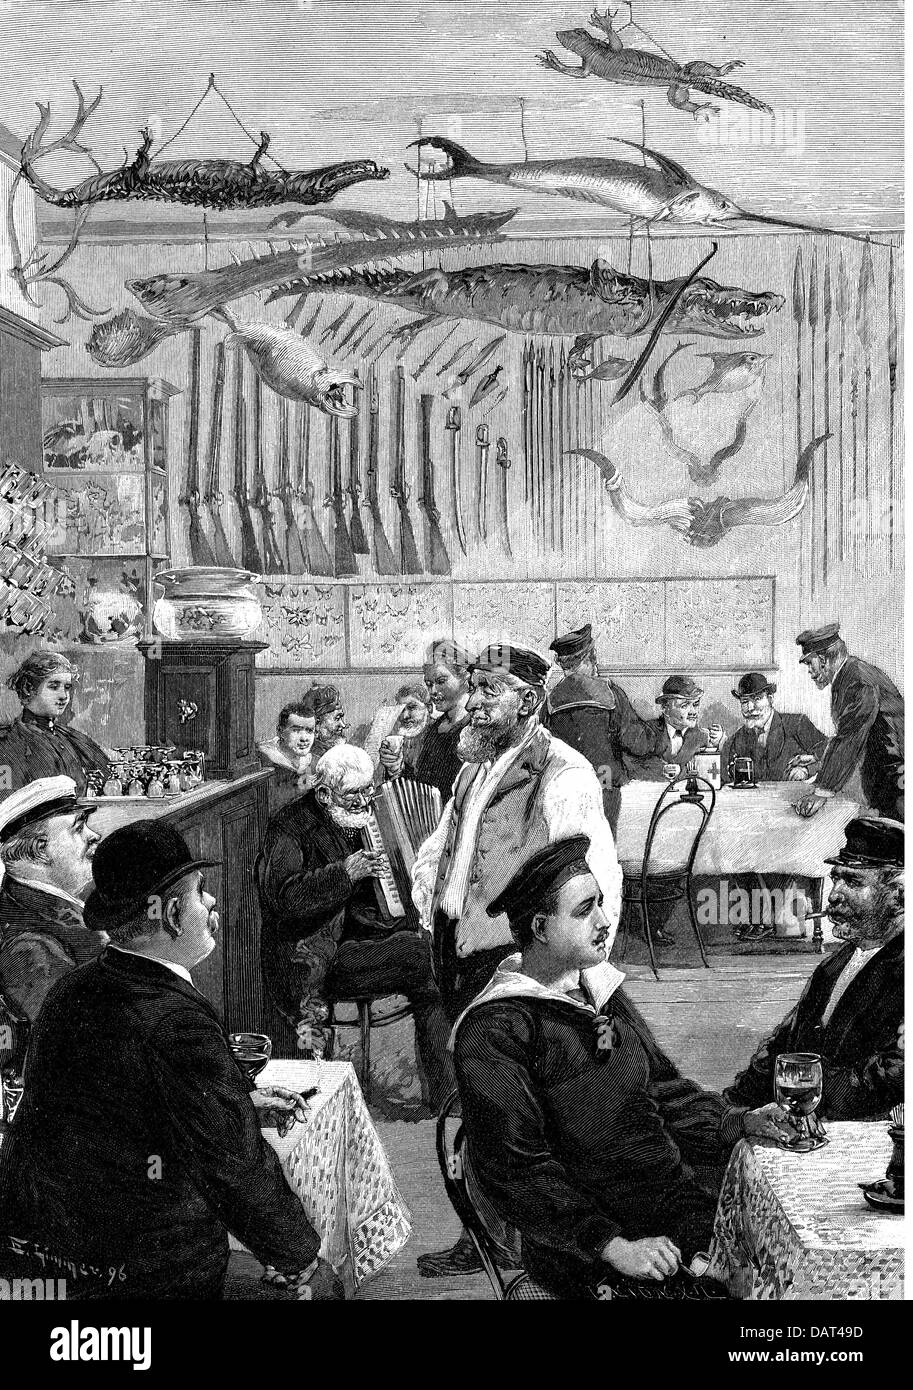 gastronomy,tavern,sailor tavern,Hamburg,interior view,after drawing by Ernst Limmer,(1854 - 1931),1896,wood engraving,1897,19th century,graphic,graphics,Germany,inns,seating area,half length,guest,guests,sitting,sit,tables,table,chairs,chair,glass,glasses,beverage,beverages,drink,drinks,wine,wines,bar,bars,musician,musicians,make music,play music,making music,playing music,makes music,plays music,made music,played music,playing,play,musical instrument,instrument,musical instruments,instruments,piano accordion,,Additional-Rights-Clearences-Not Available Stock Photo